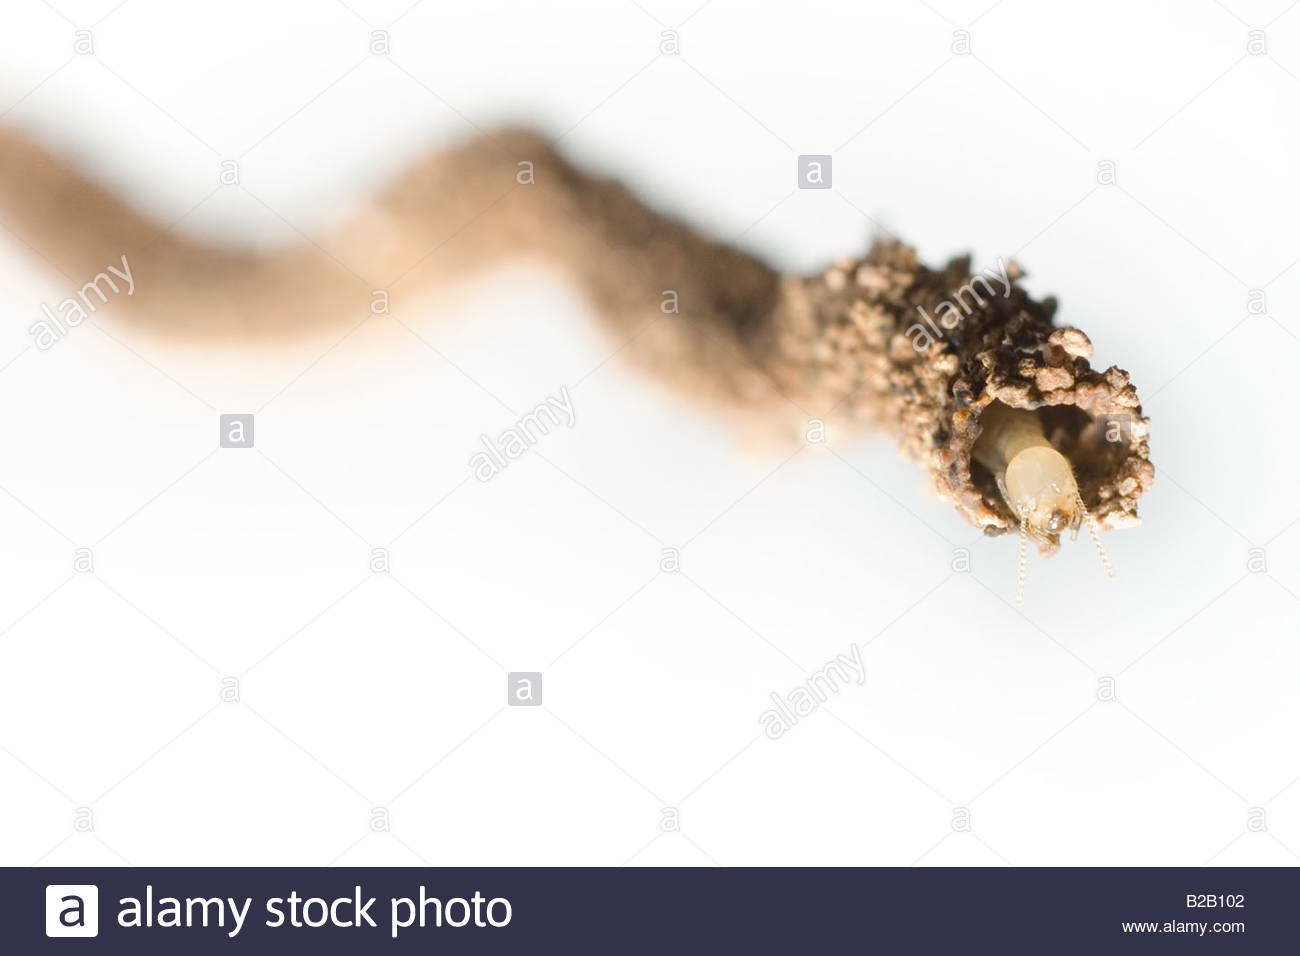 Termites Build A Vent Tube Descending From The Ceiling Of A